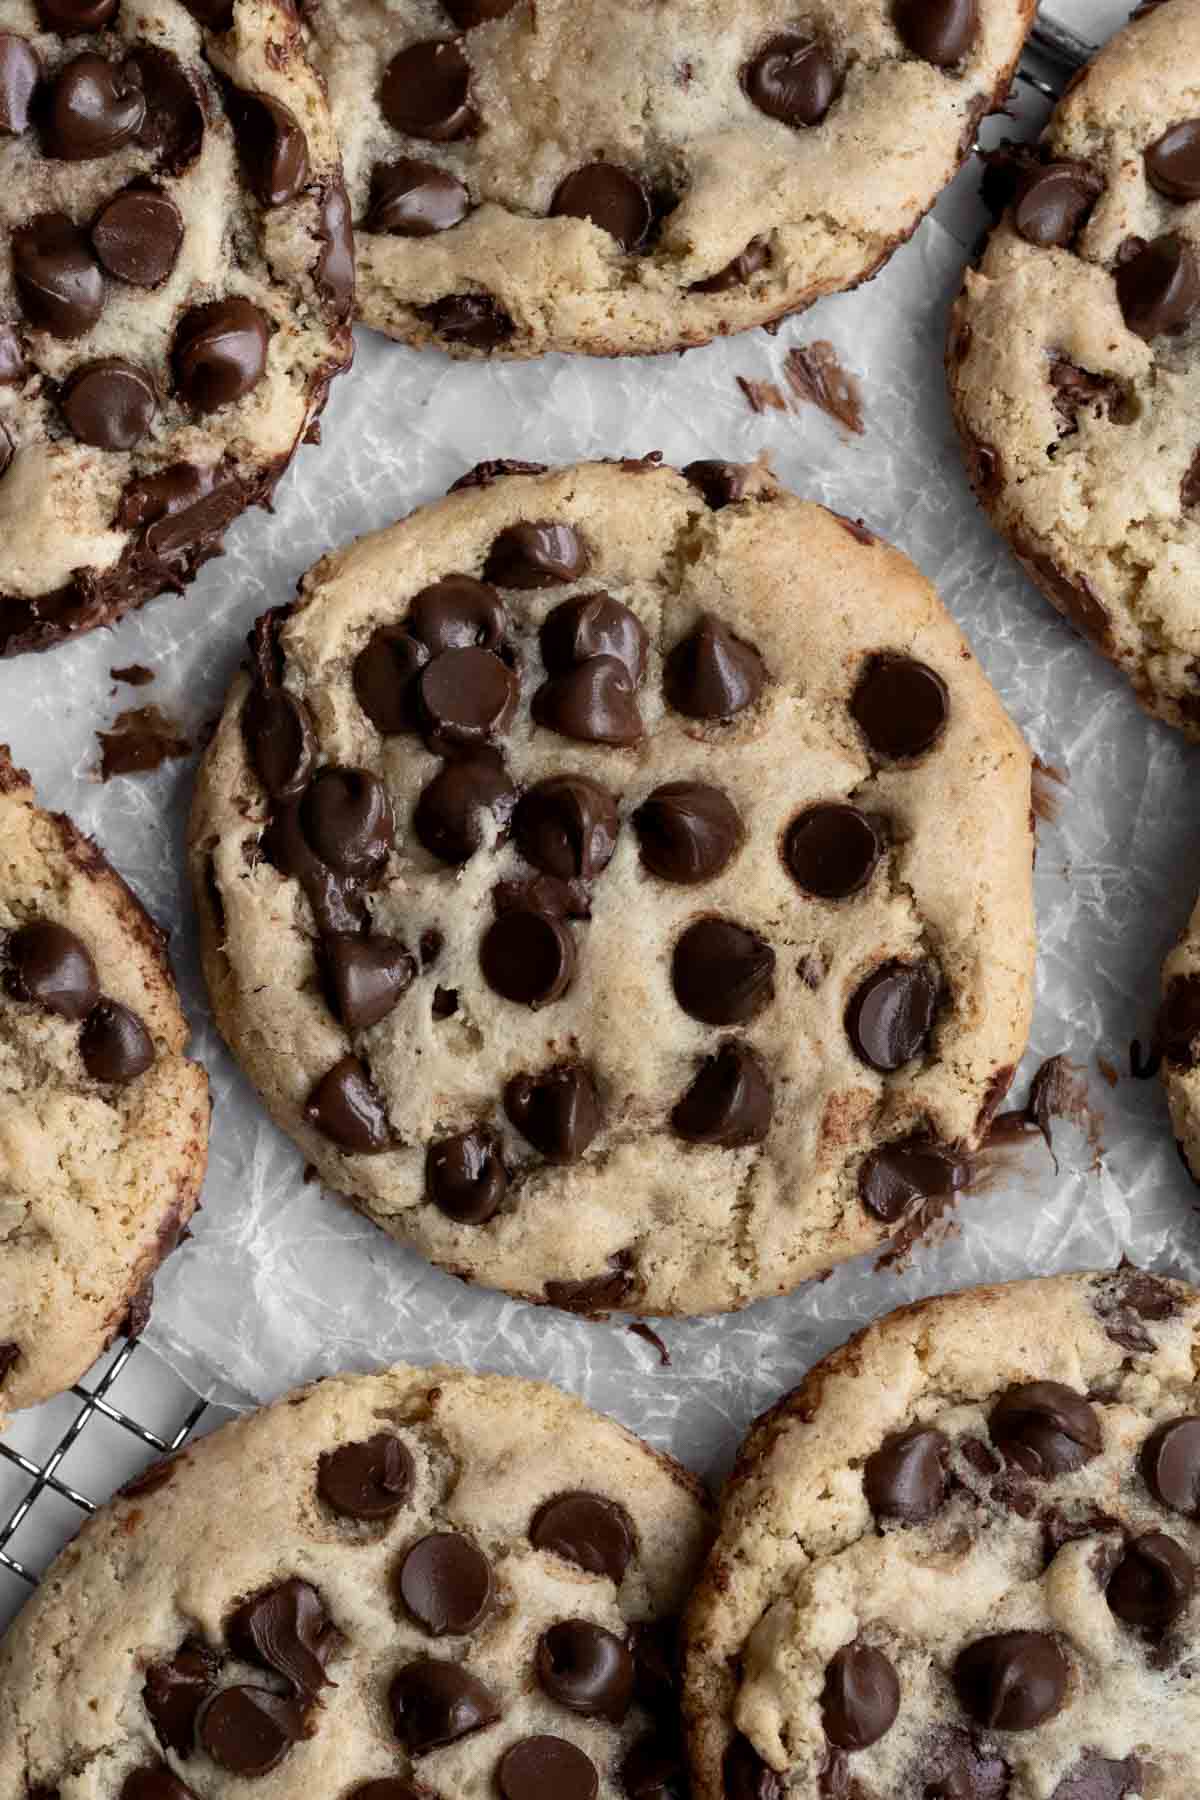 Delicious gluten free Quick Chocolate Chip Cookies with slightly melted chocolate chips.